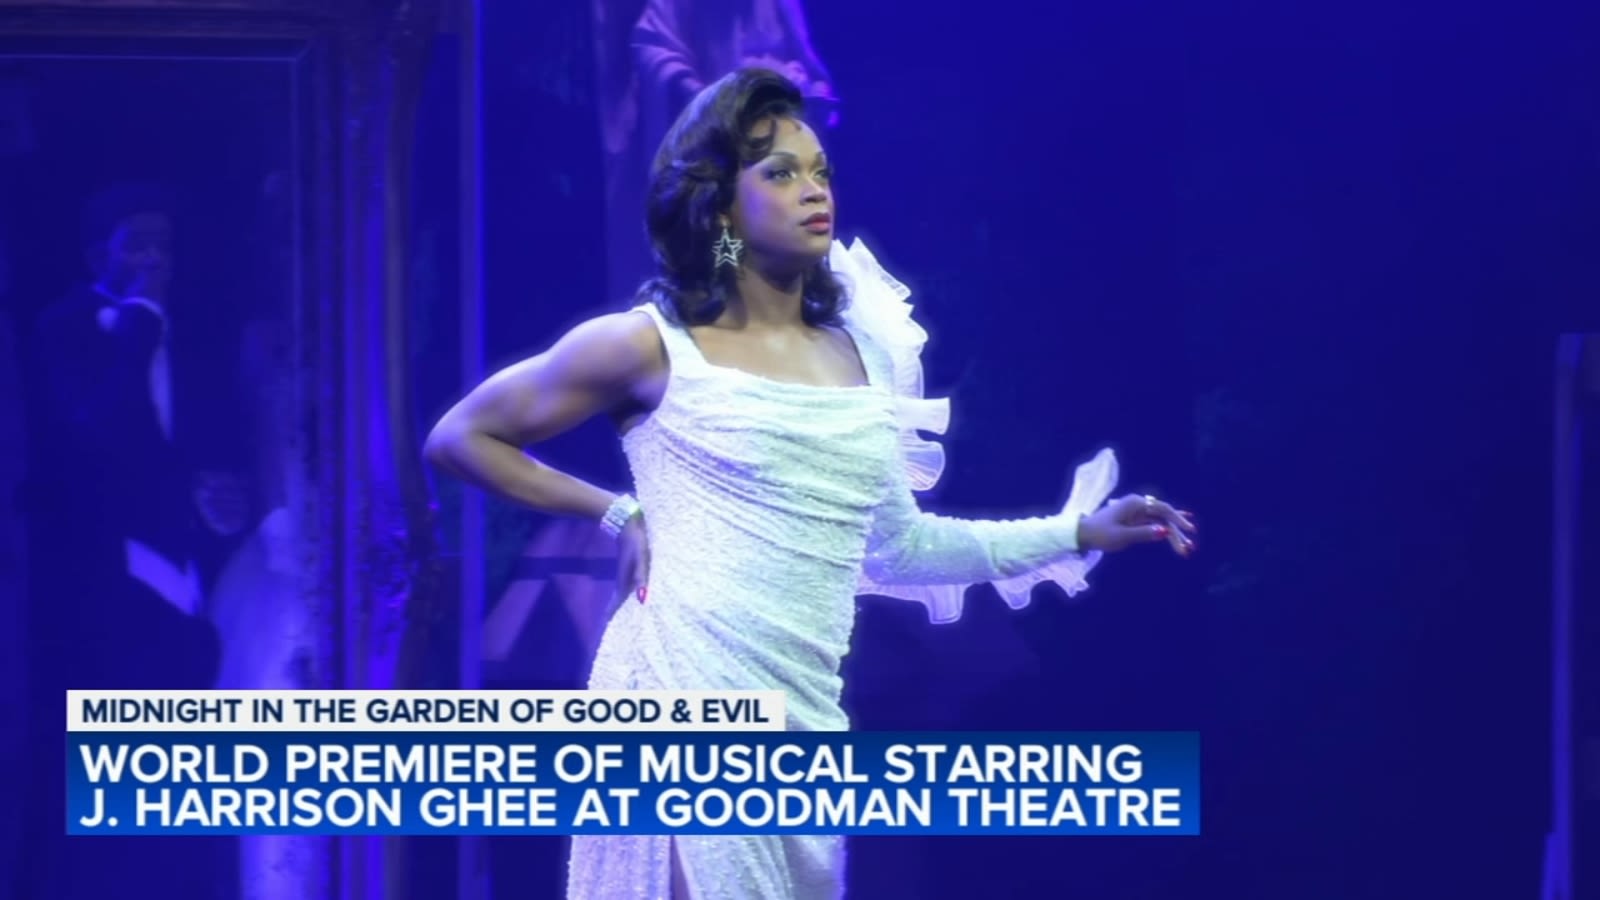 'Midnight in the Garden of Good and Evil' premieres at Goodman Theatre starring J. Harrison Ghee